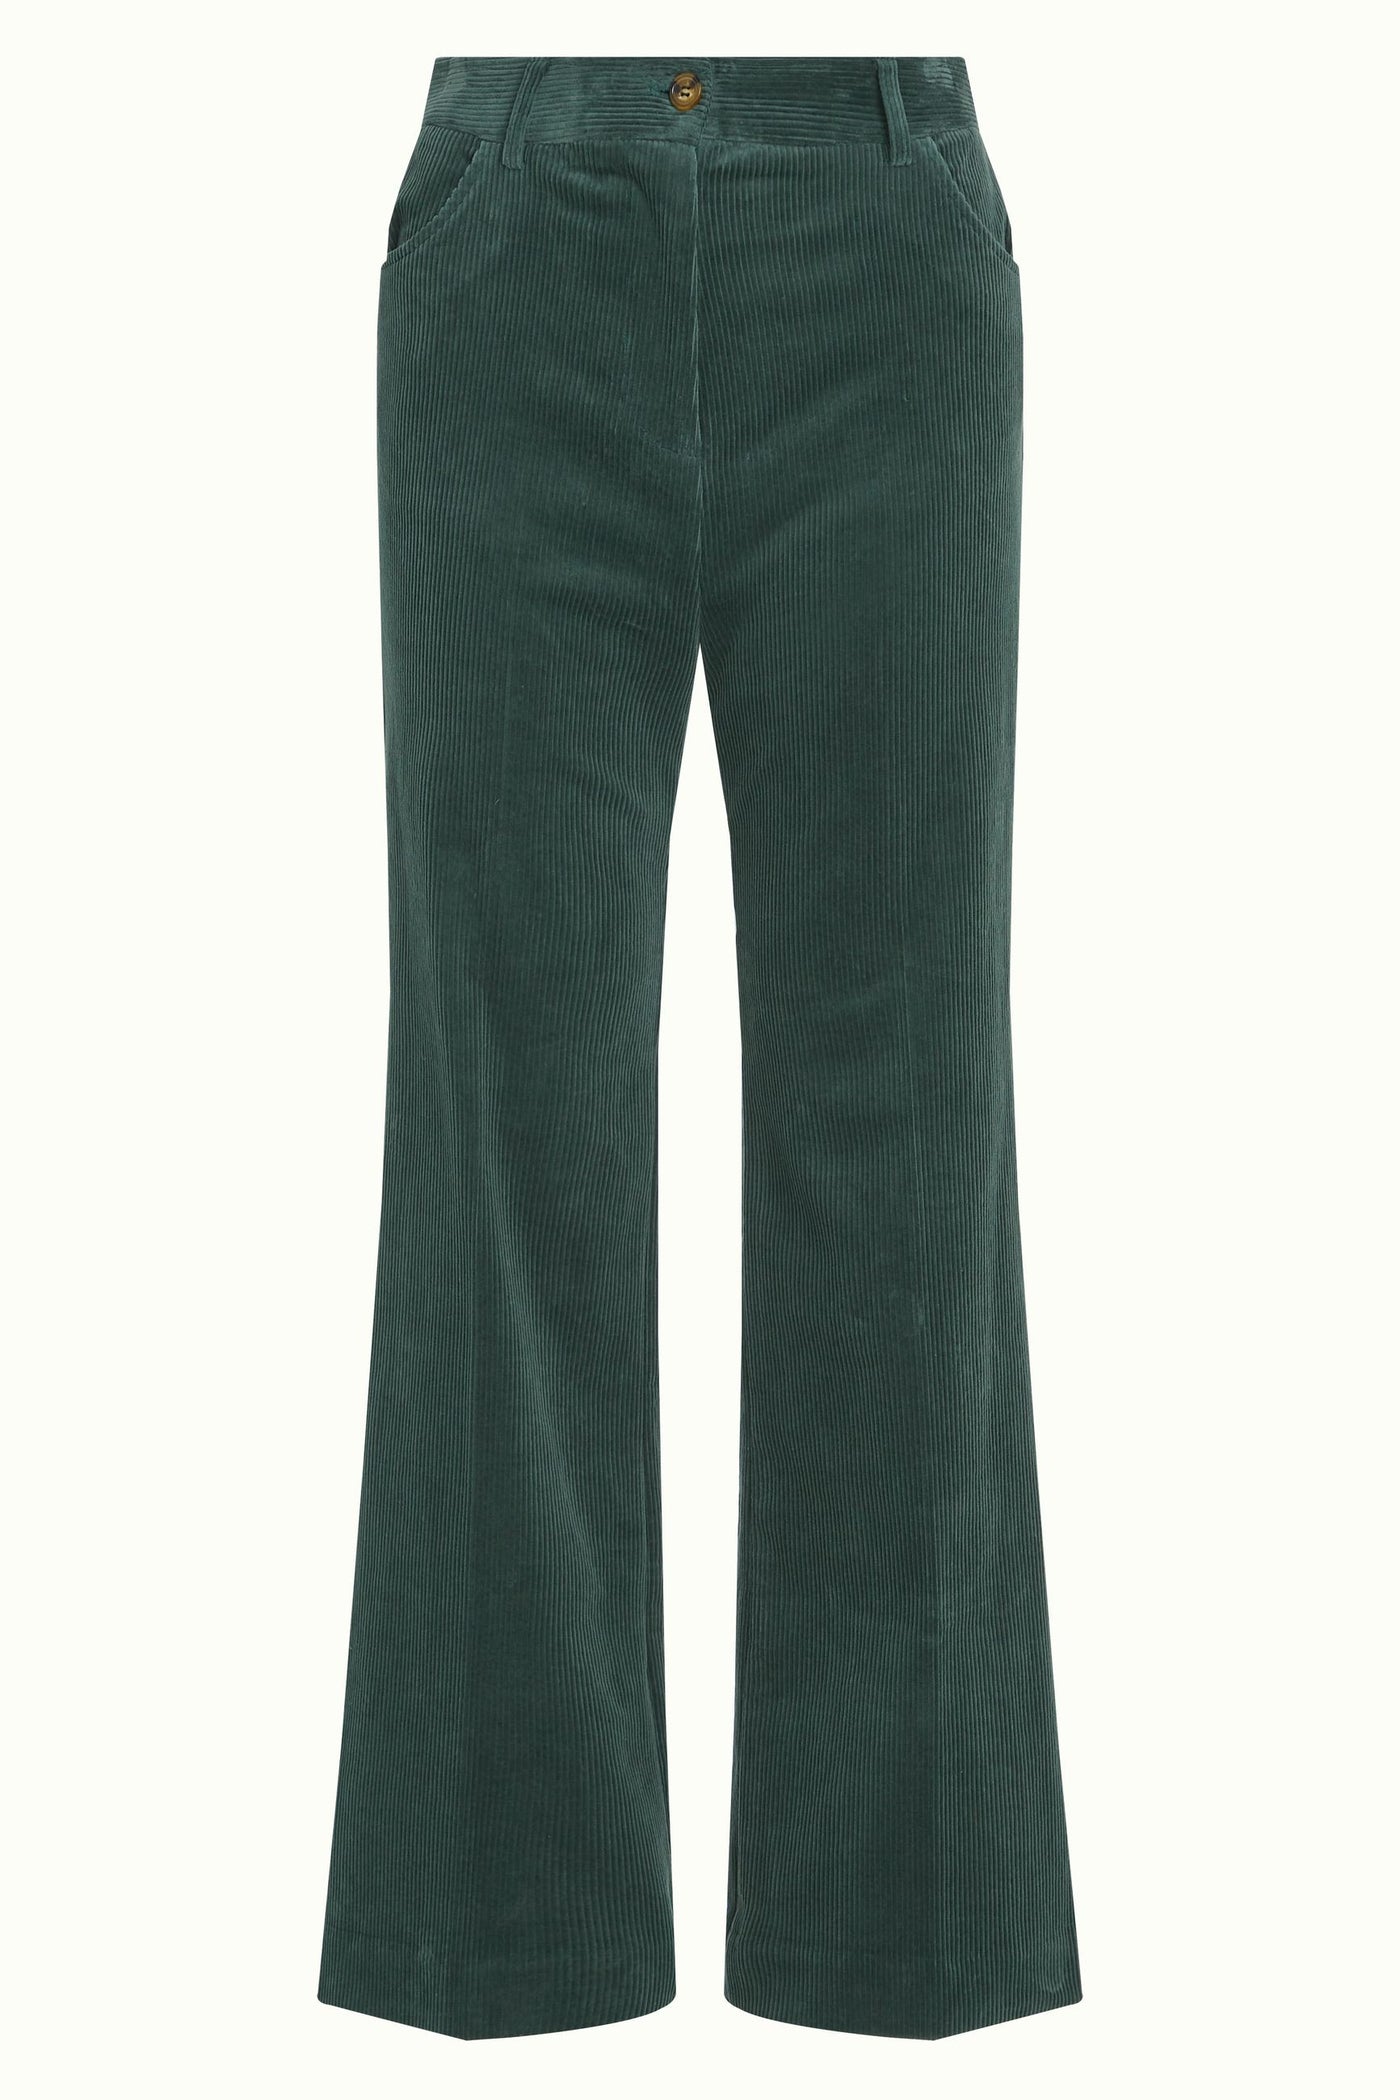 King Louie Marcie Pants Corduroy #farve_sycamore-green